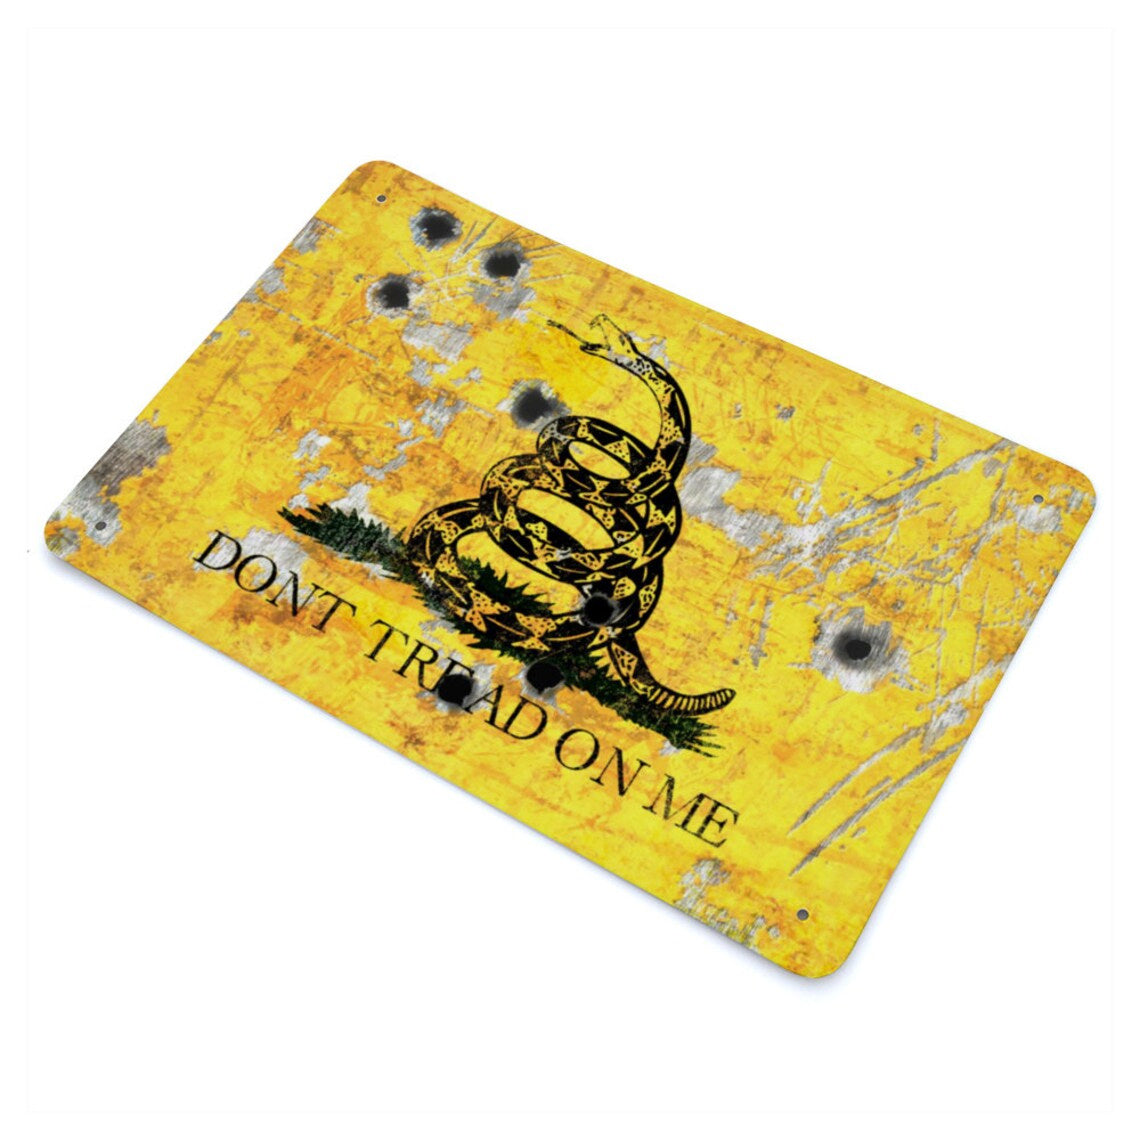 Gadsden Flag on Distressed Metal with Bullet Hole Don’t tread on Me Print on Metal sideway